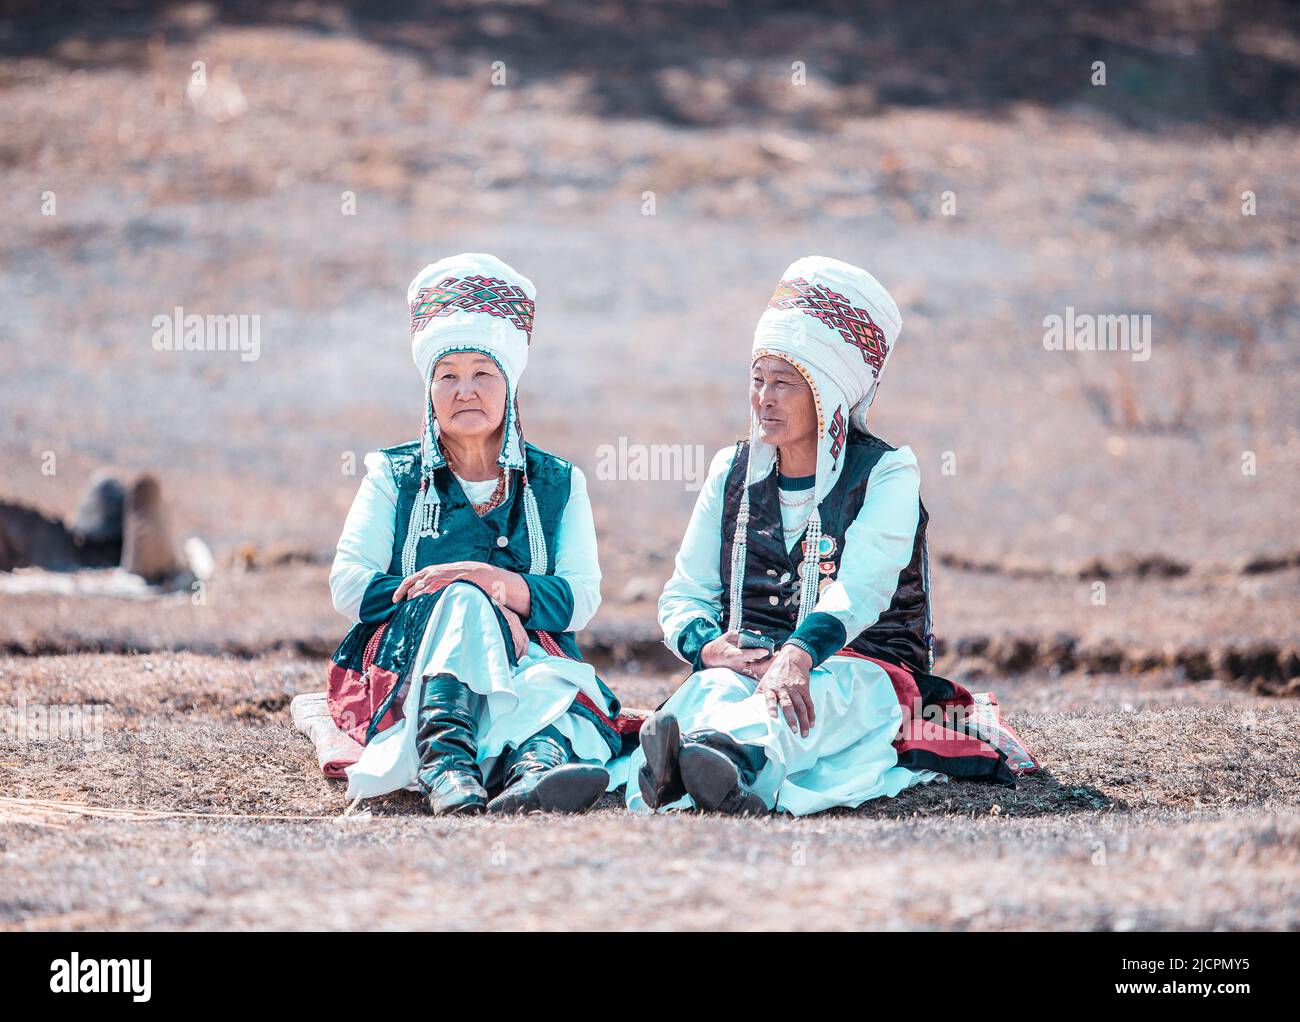 Isyk-Kul, Kyrgyzstan - September 29, 2018: Kyrgyz woman in national dress during World Nomad Games Stock Photo